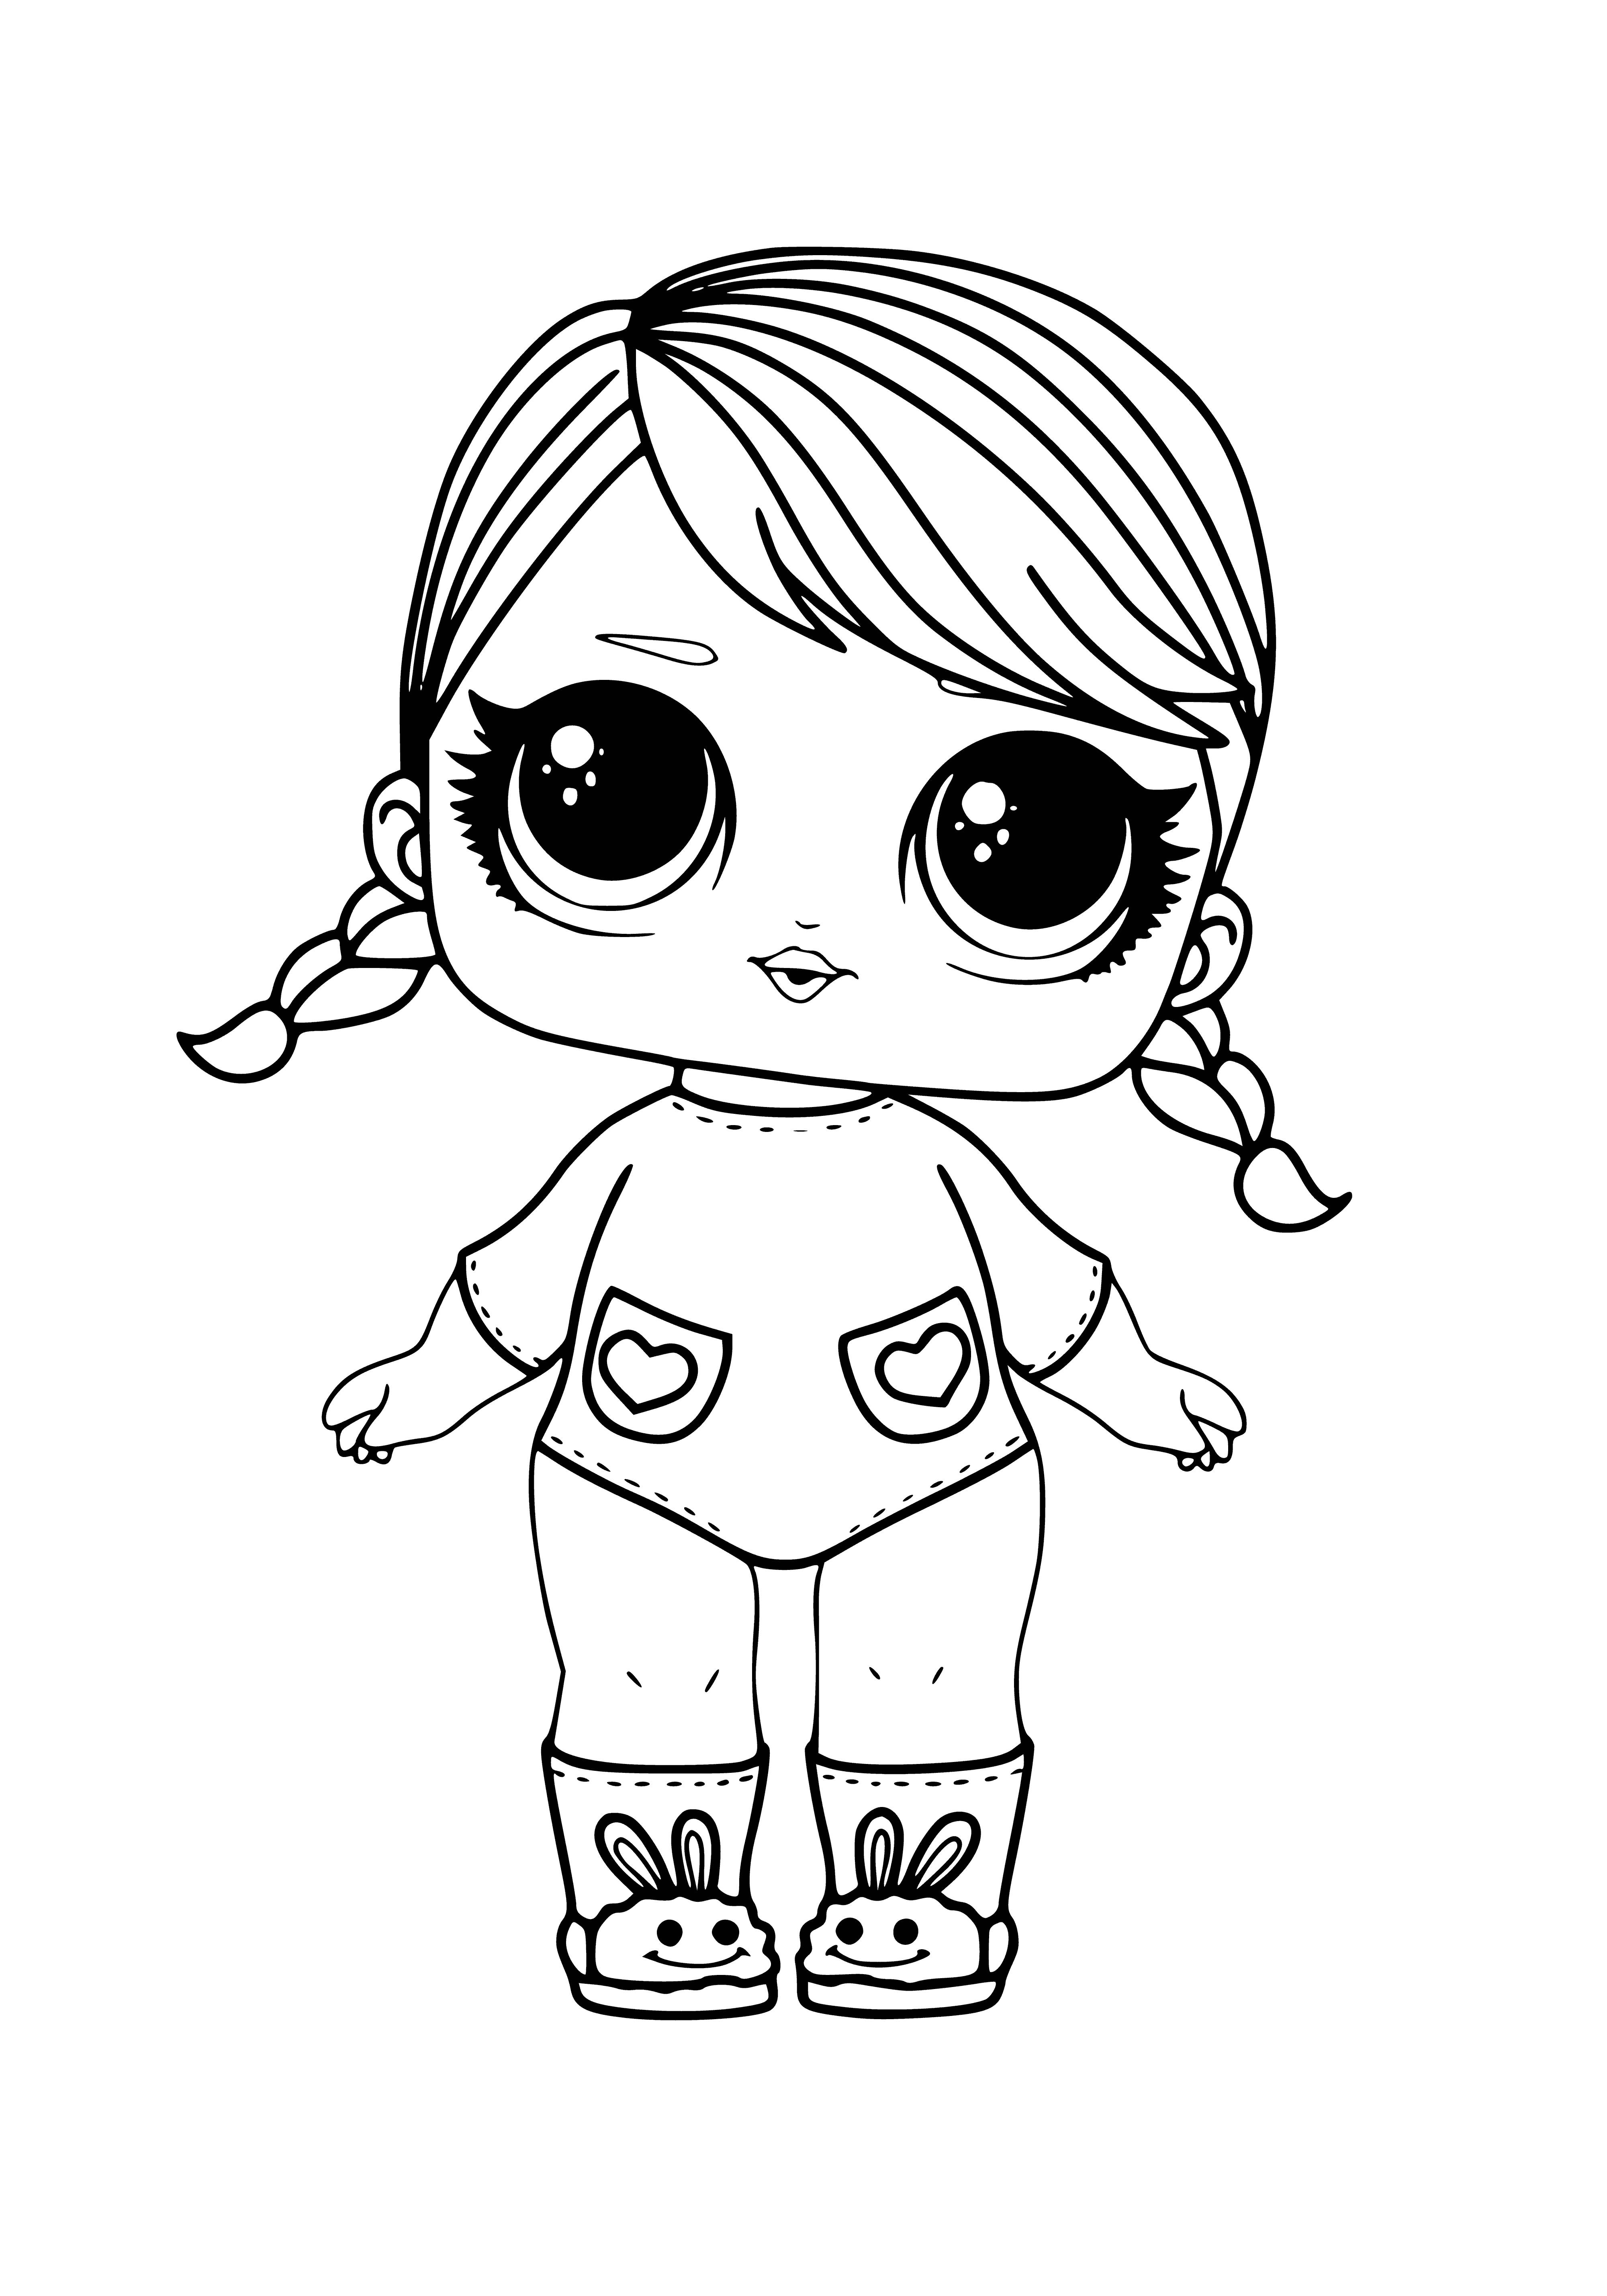 Coloring lola coloring page